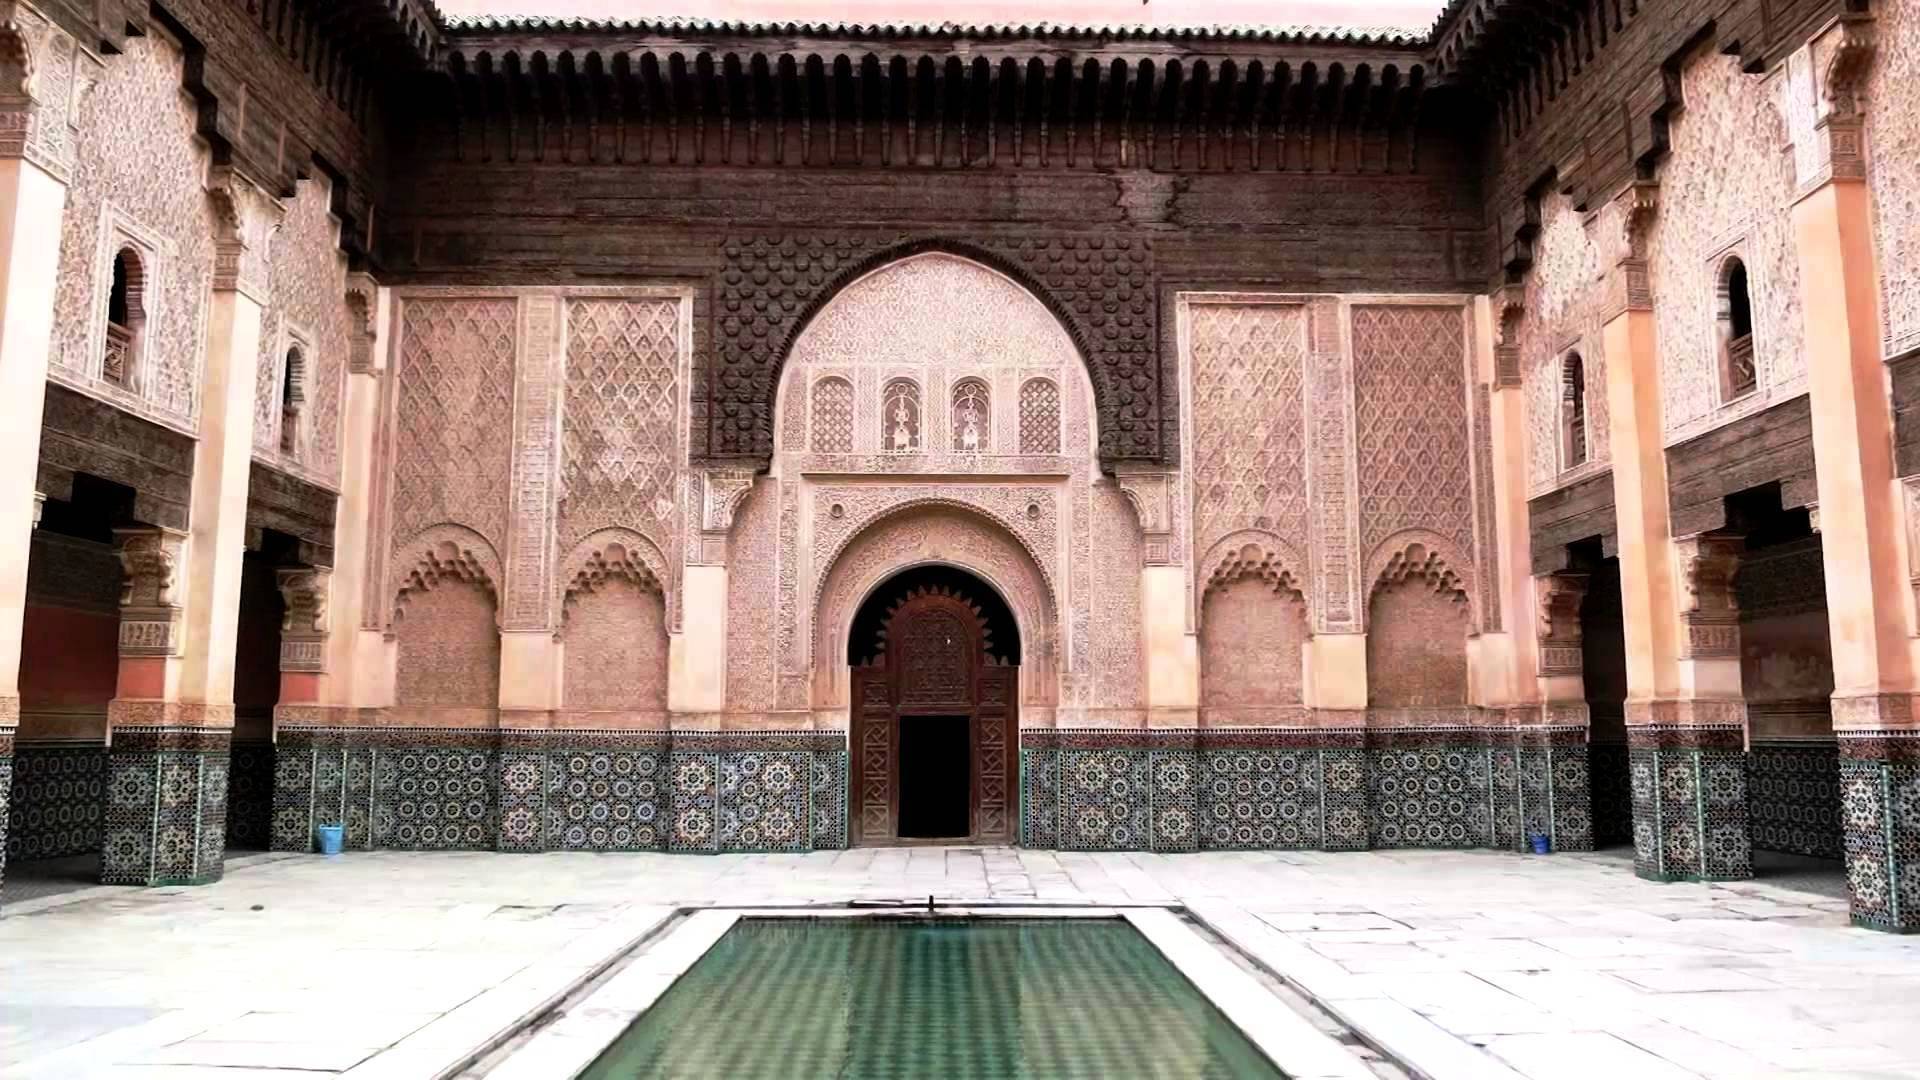 Marrakech city guided tours to explore Marrakesh accompanied by tours guides